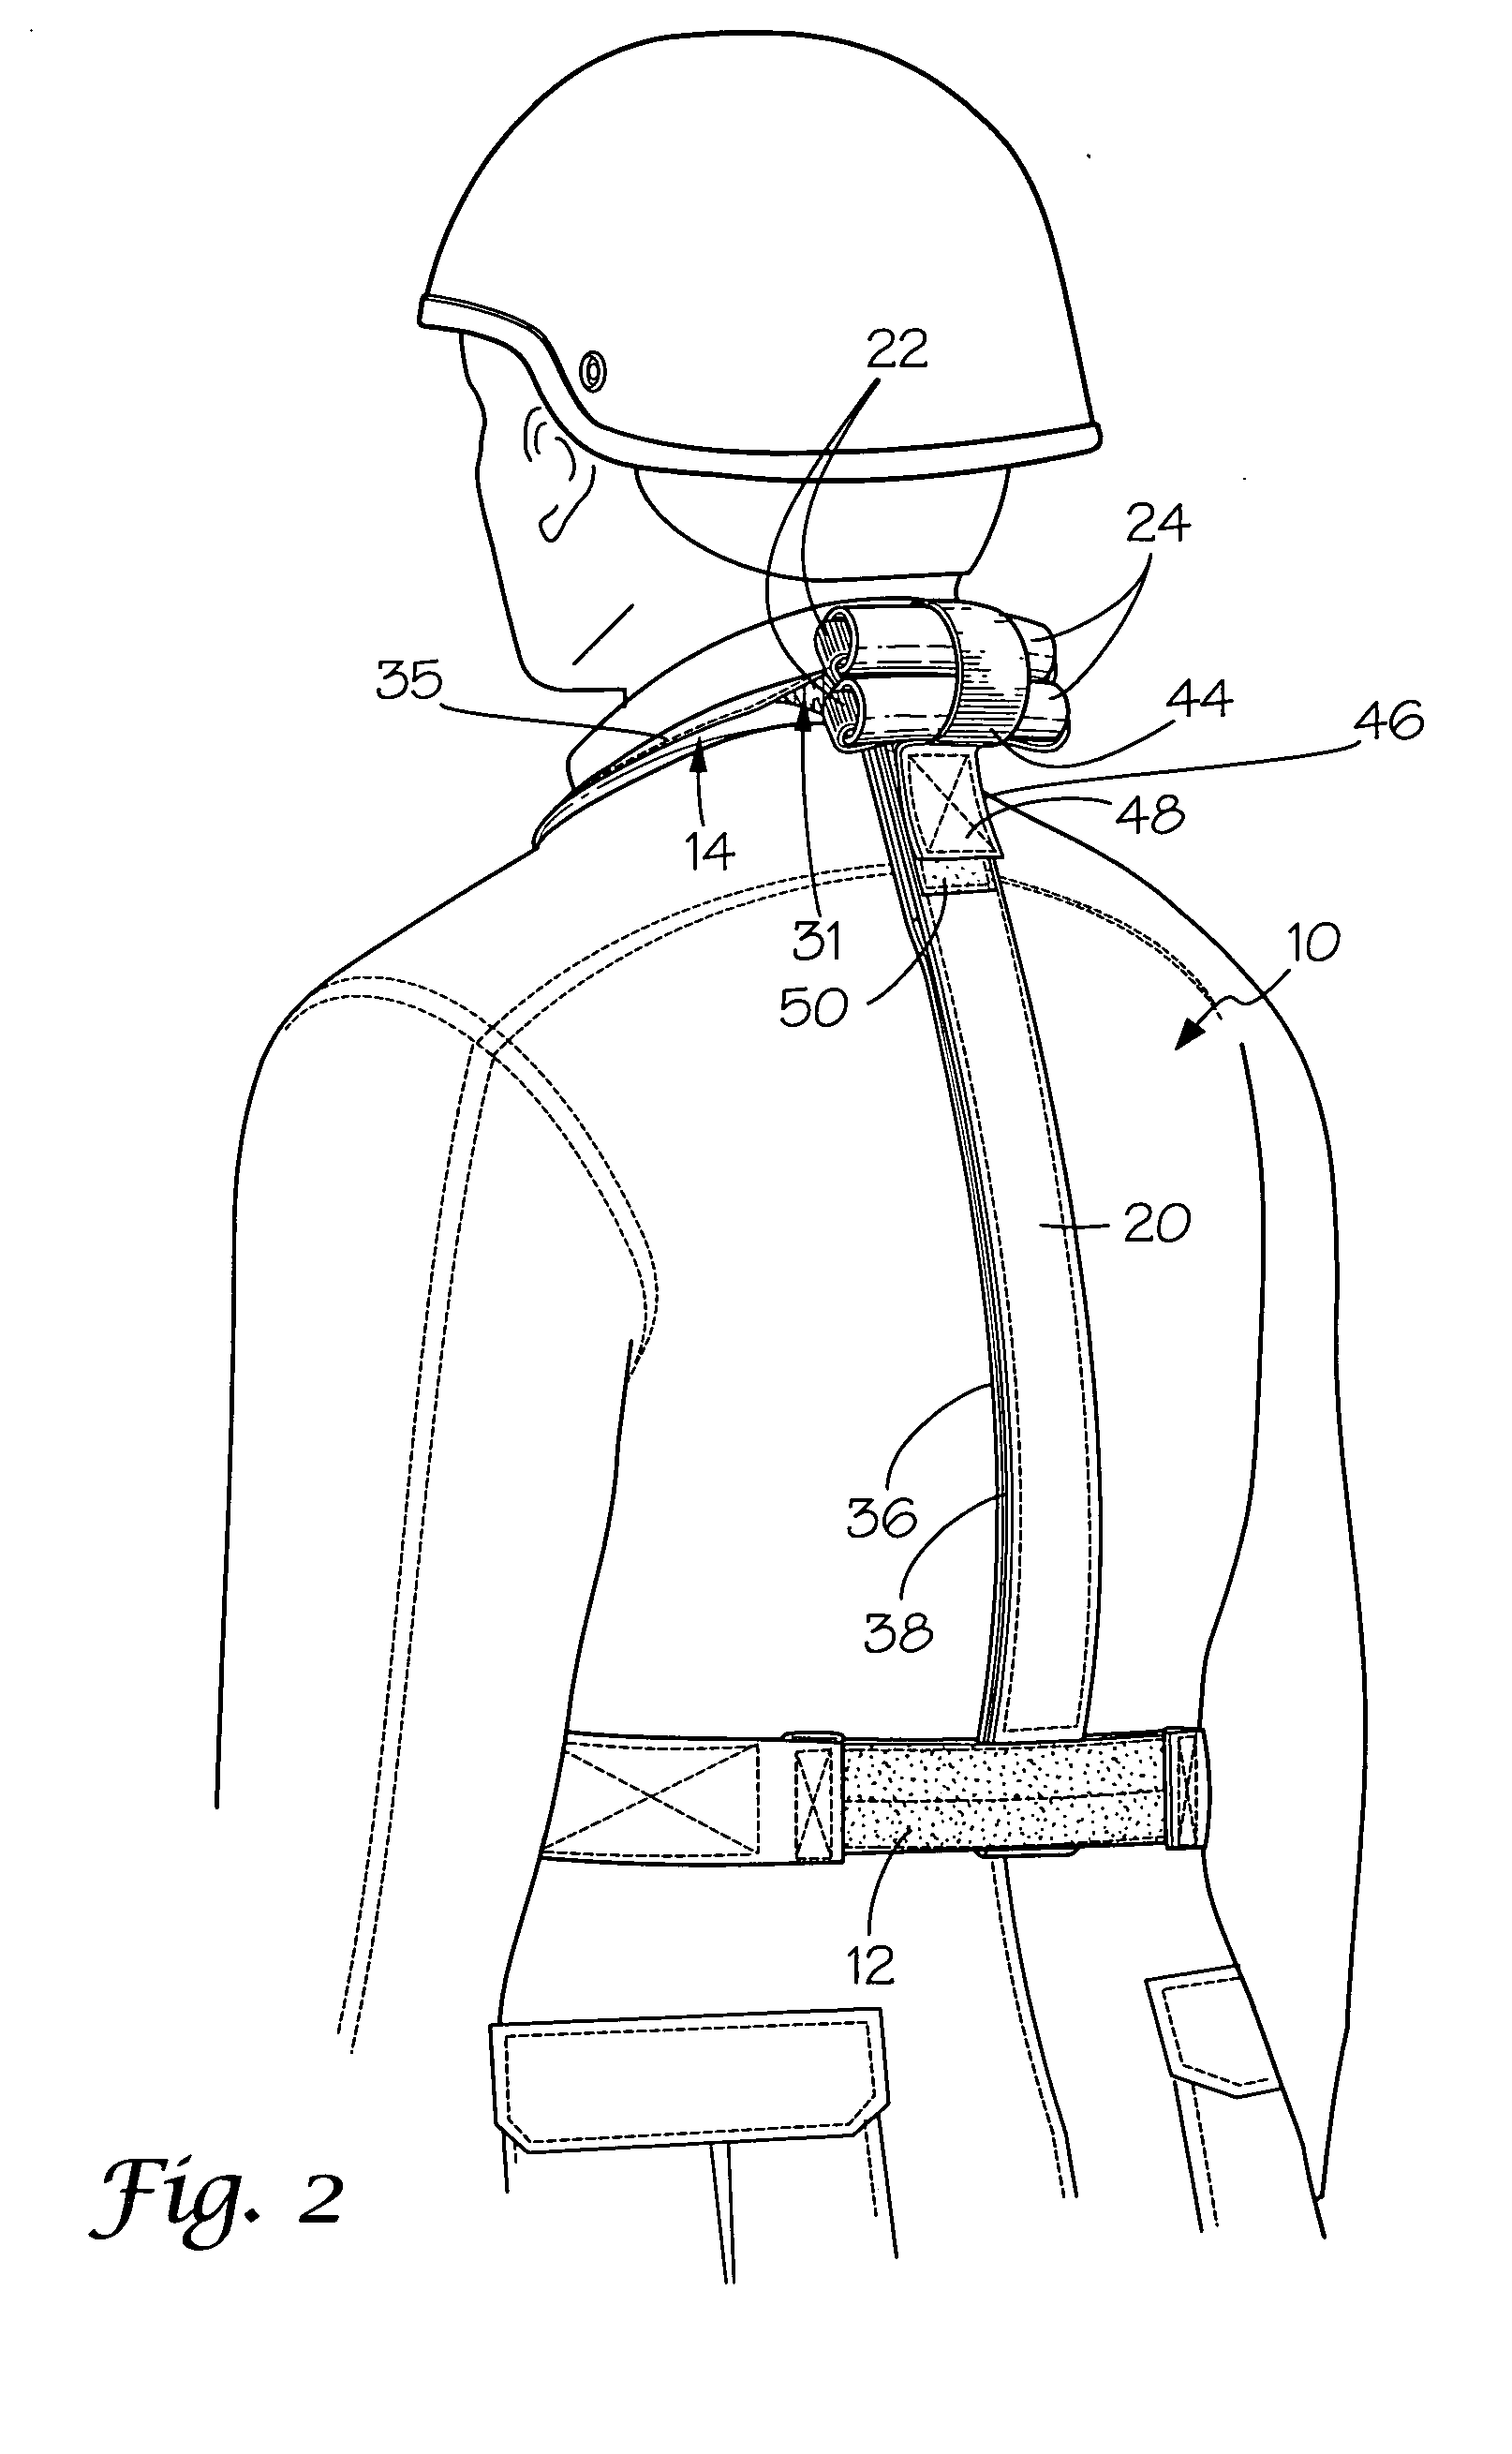 Rapid extraction body harness with extendable drag straps